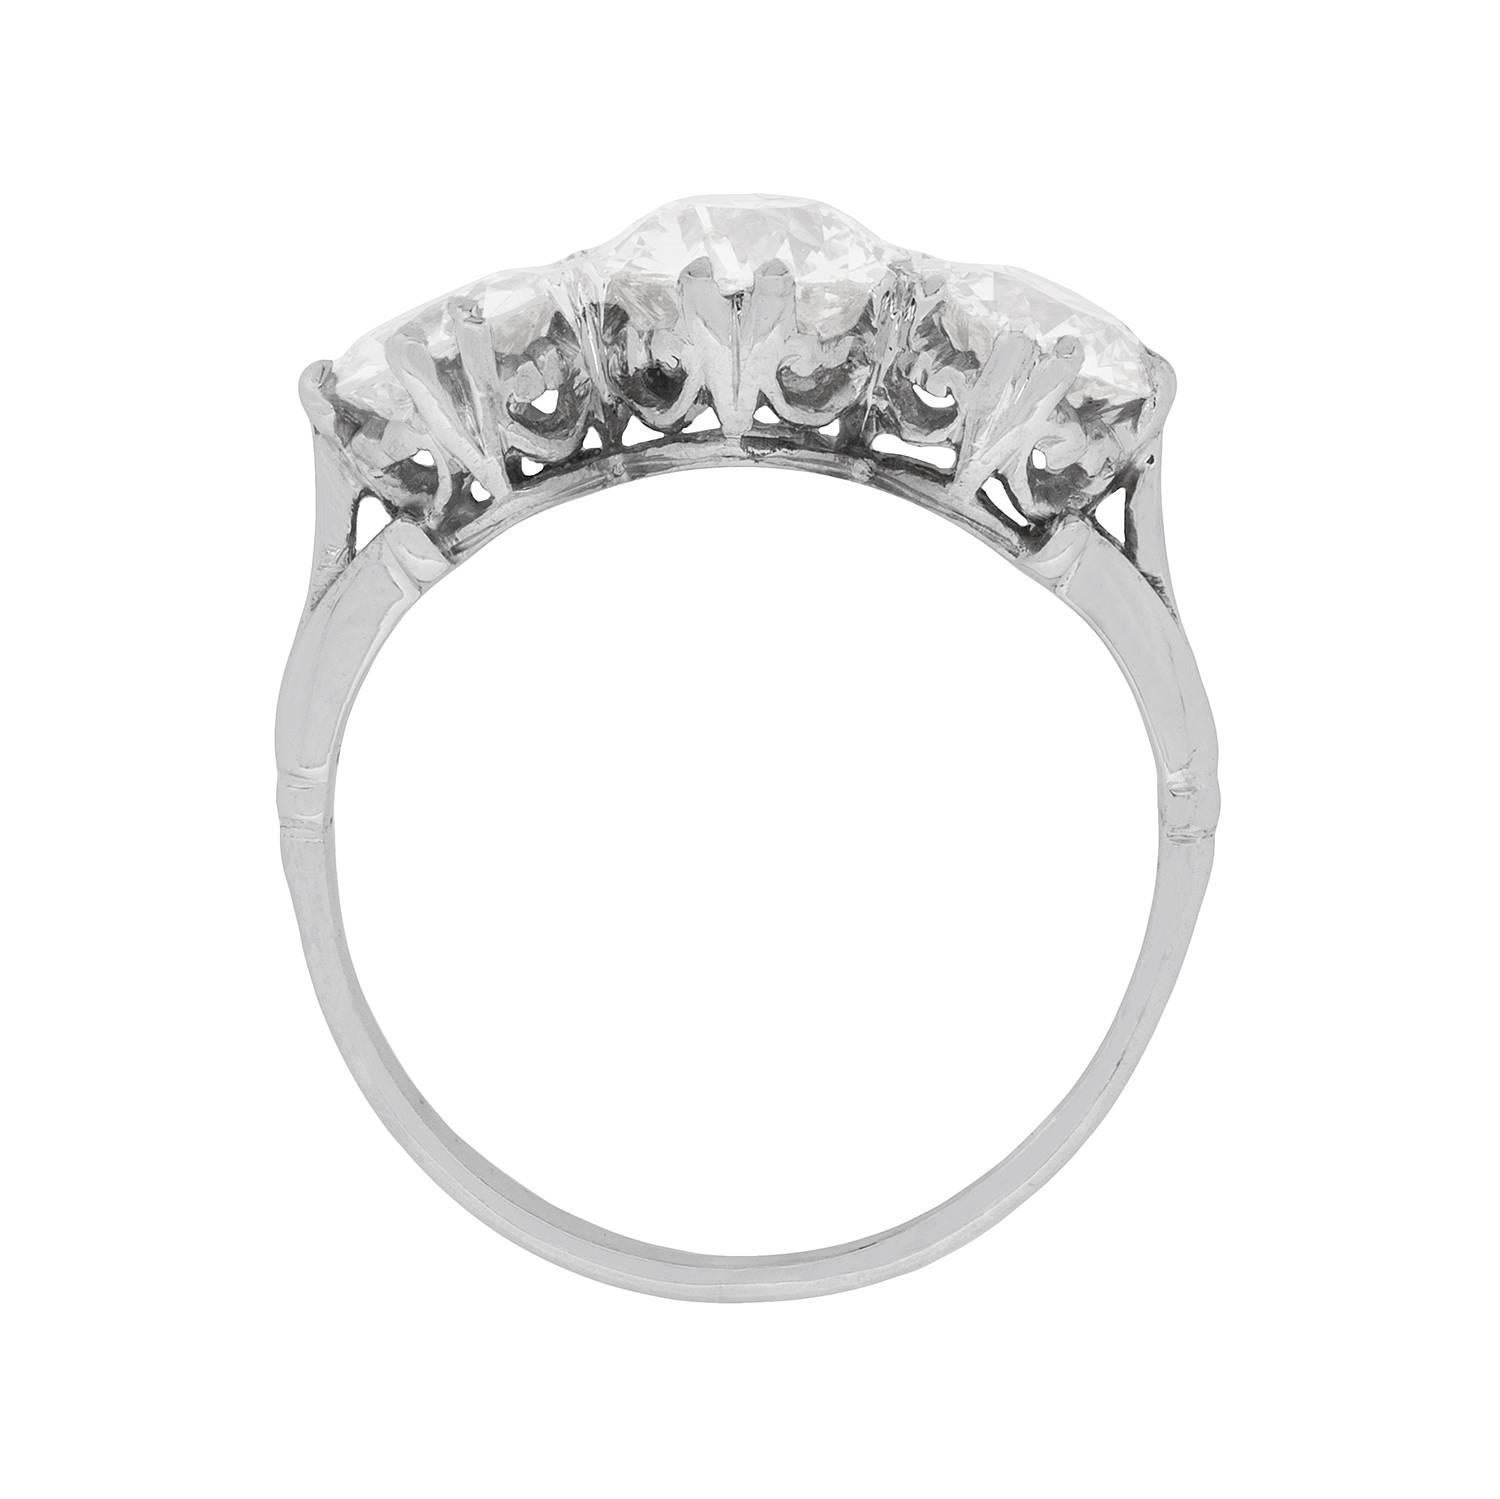 This absolutely stunning three stone ring features a centre stone of 1.50 carat, supported on either adjacent side by 1.00 carat diamonds. The stones are sparkling old cuts, which have been estimated F to G in colour and VS in clarity. They are